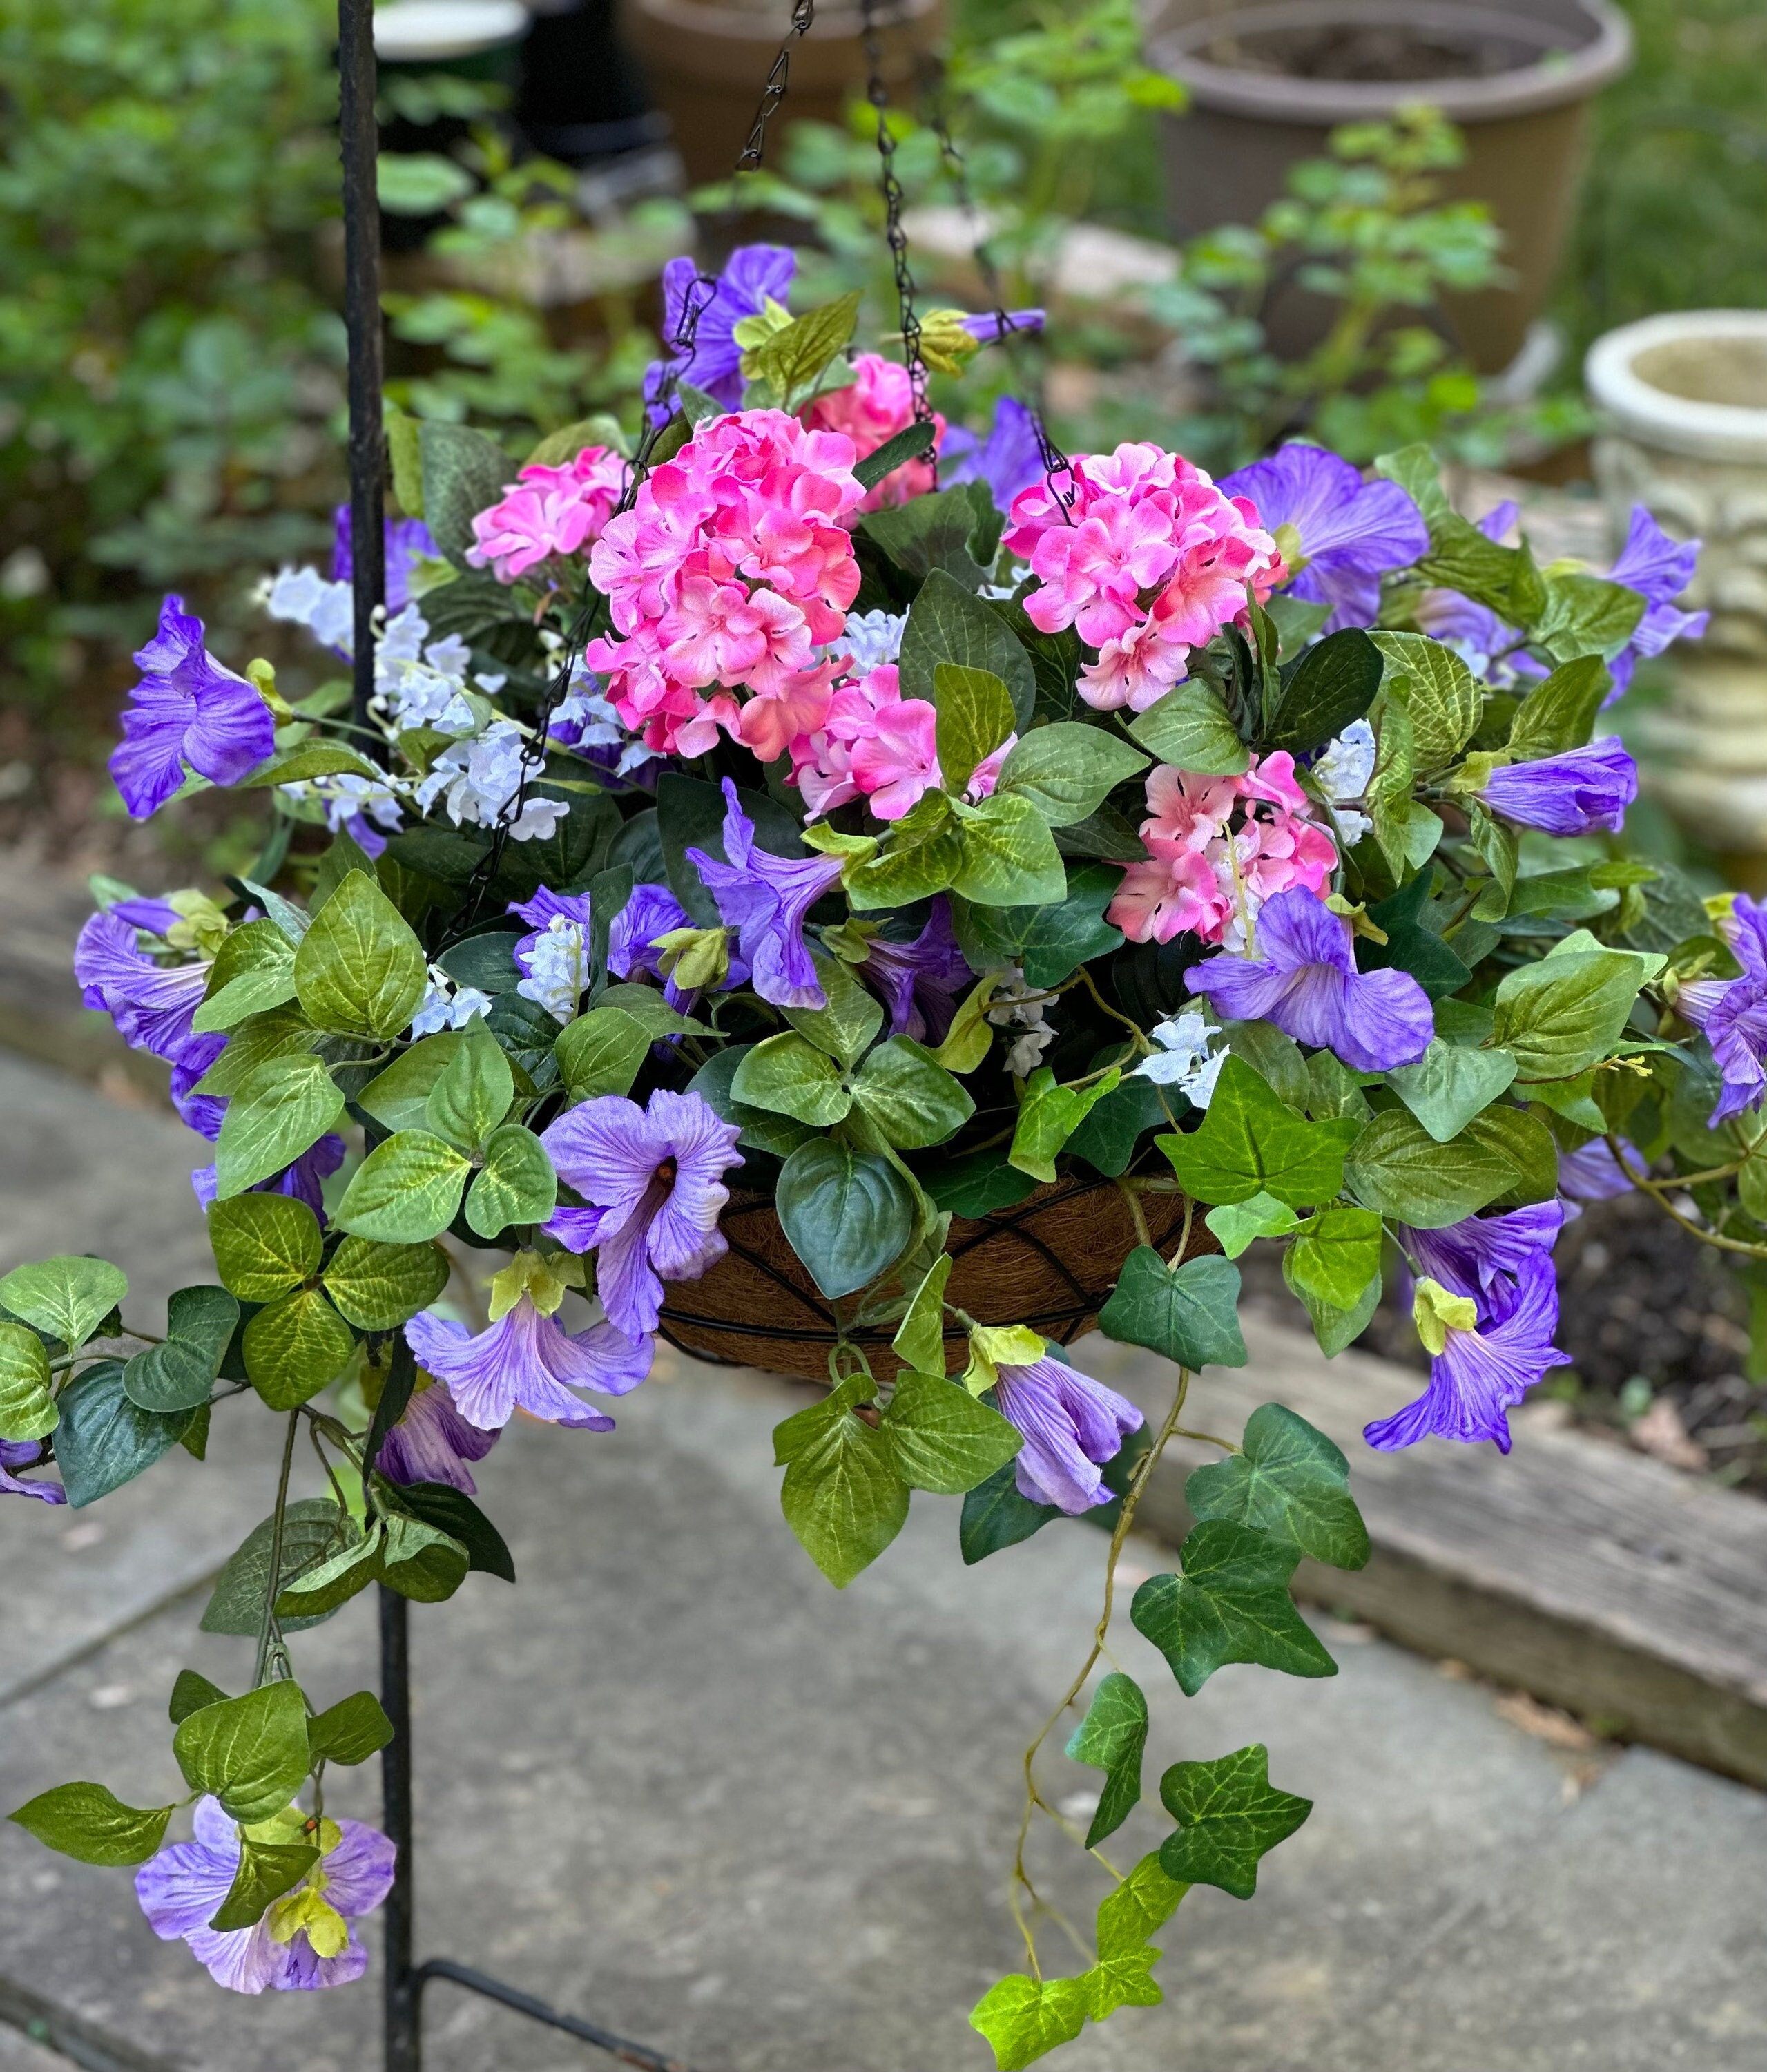 Image of Hanging basket filled with hydrangea plant with purple blooms